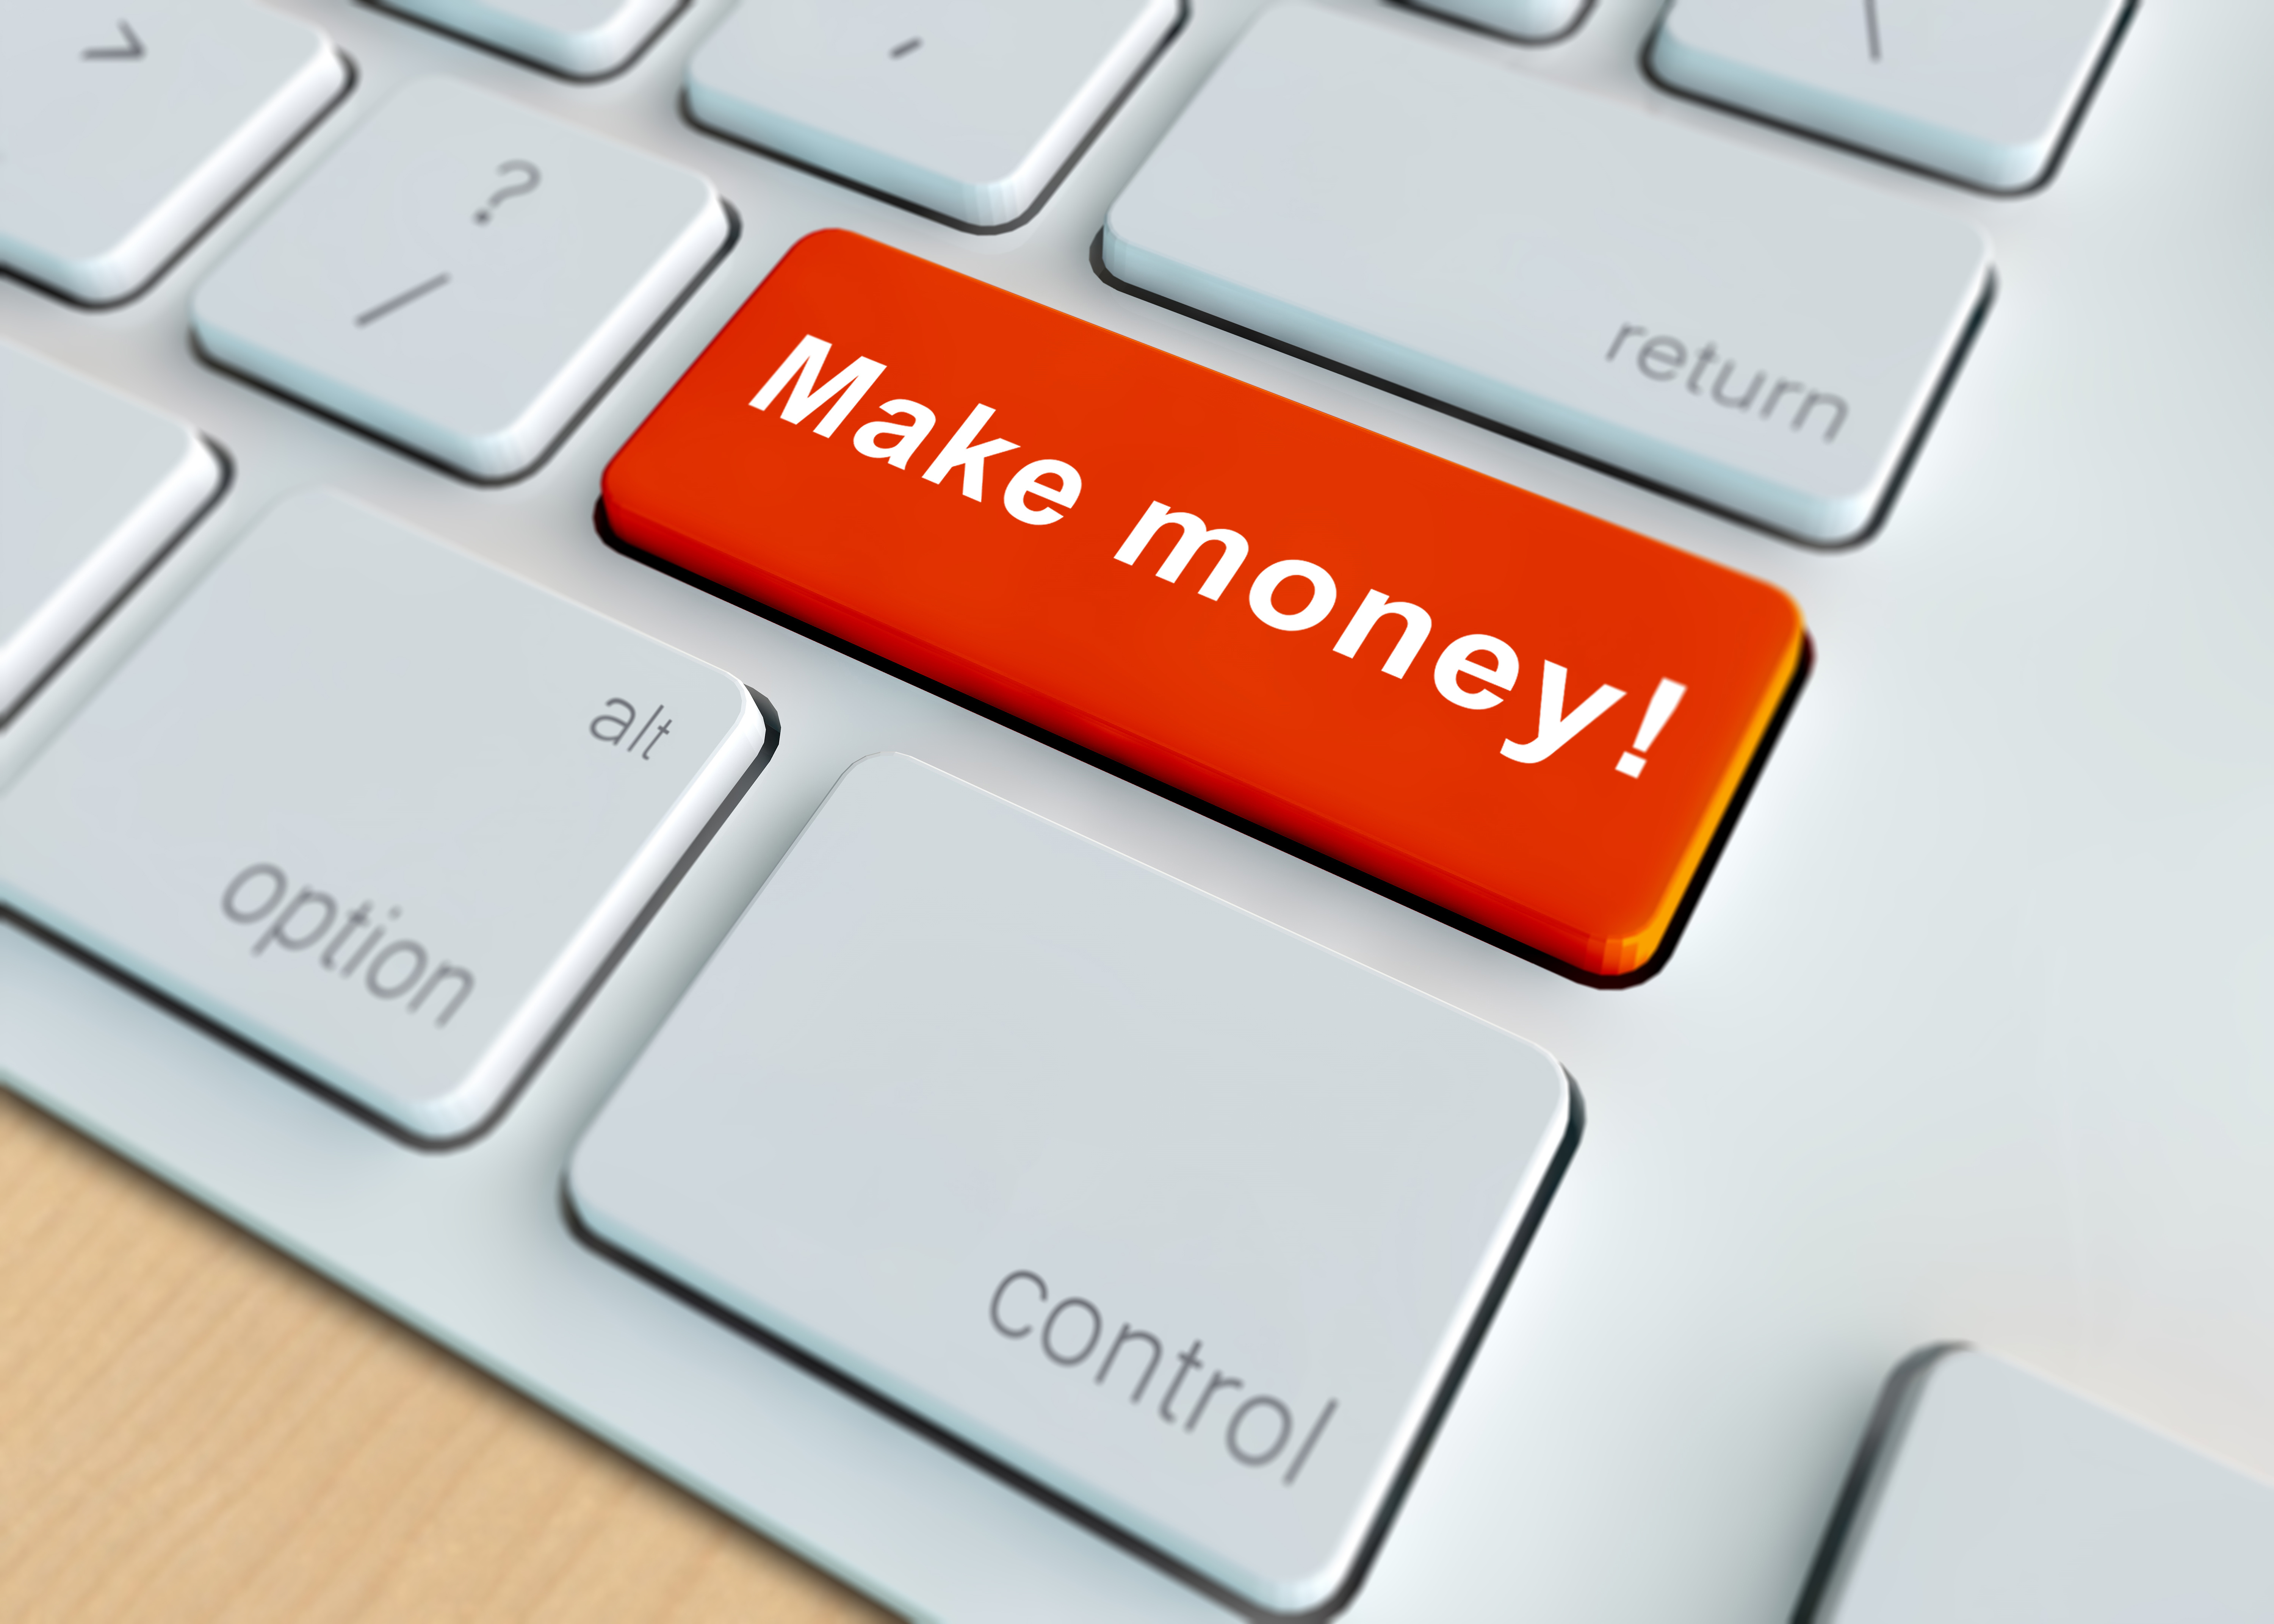 9 Ways to Make Money Online - The European Business Review